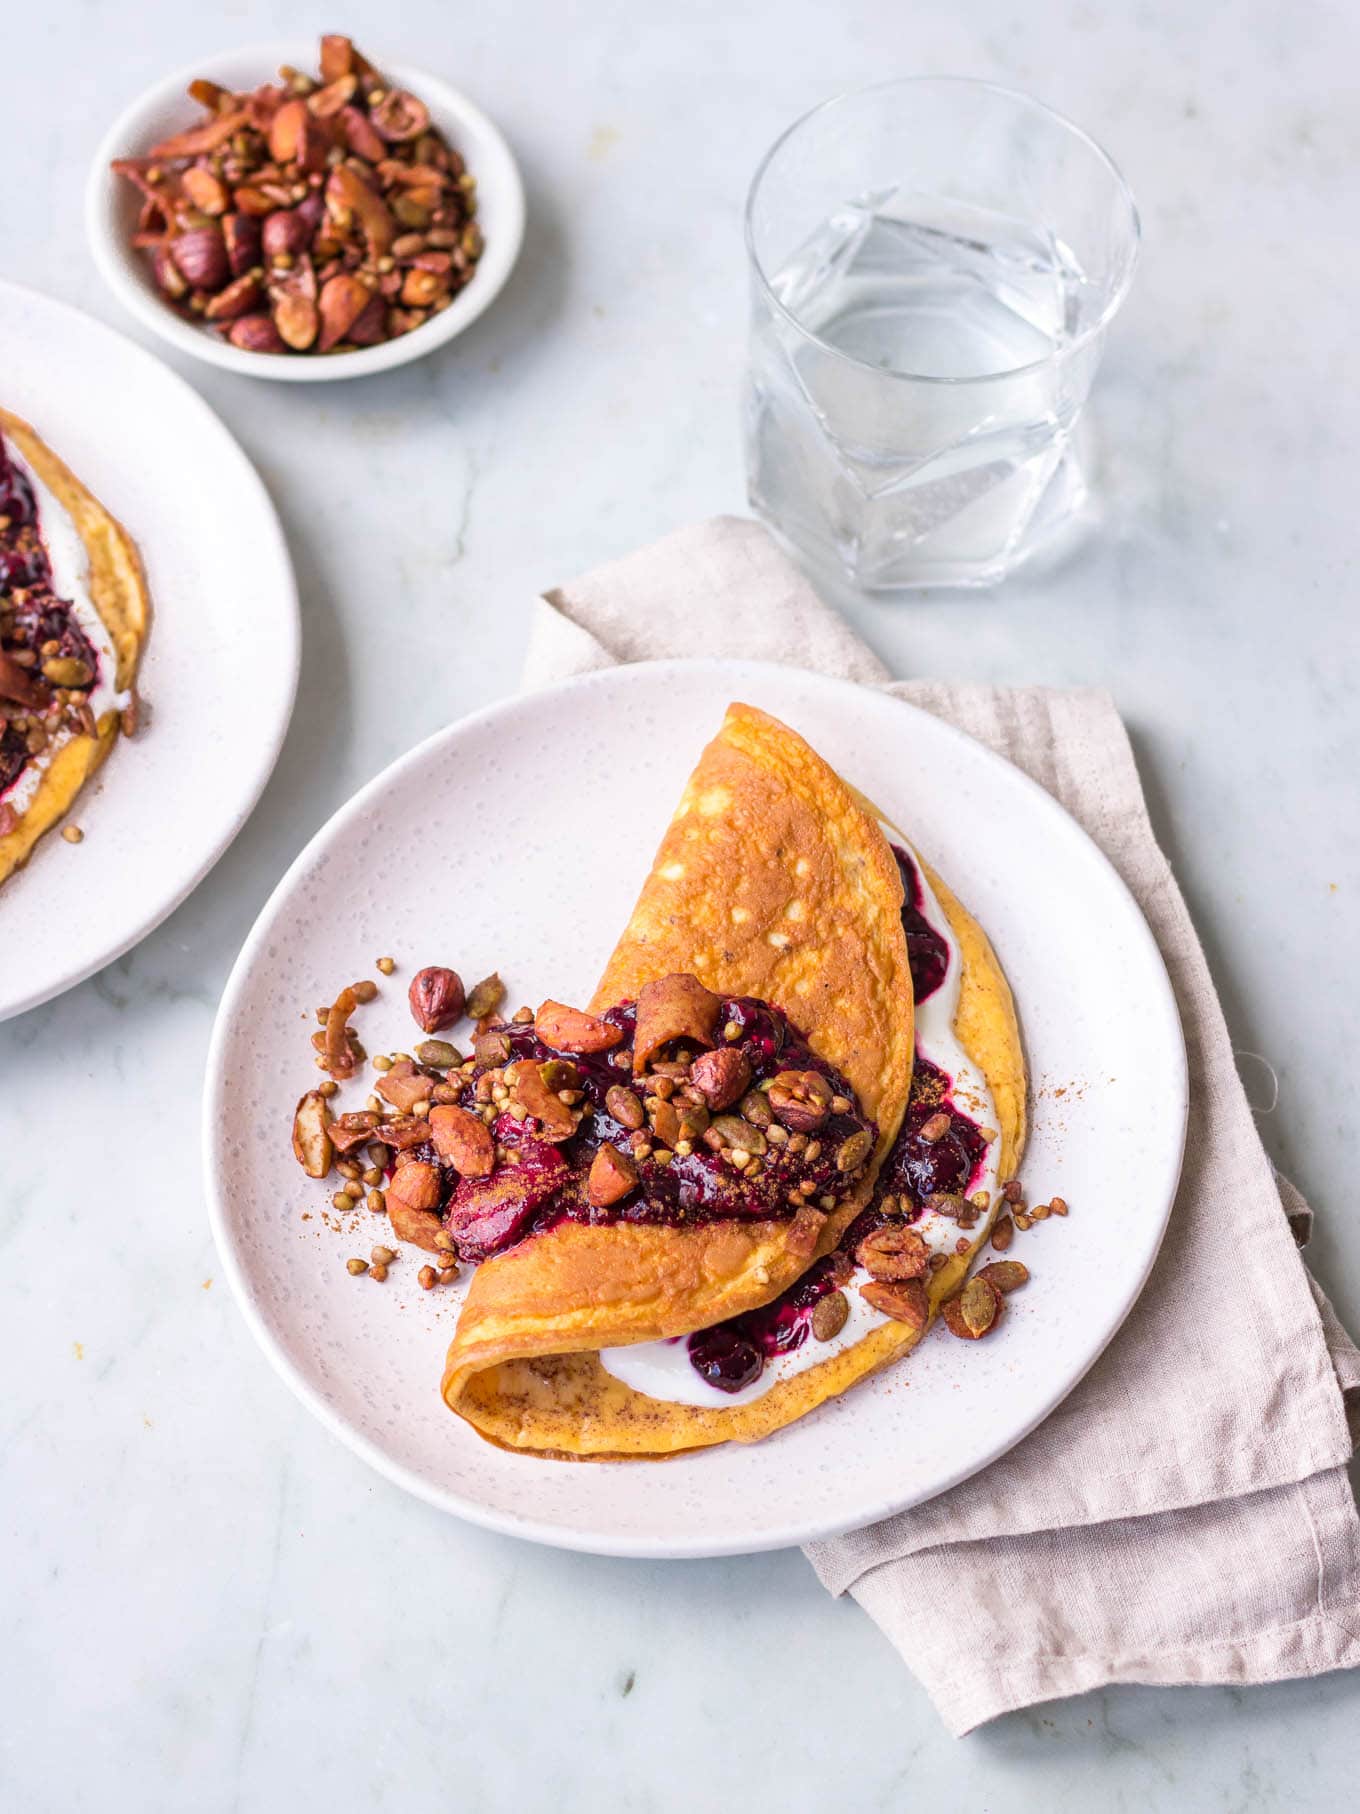 Sweet cinnamon omelette with berry compote and granola topping